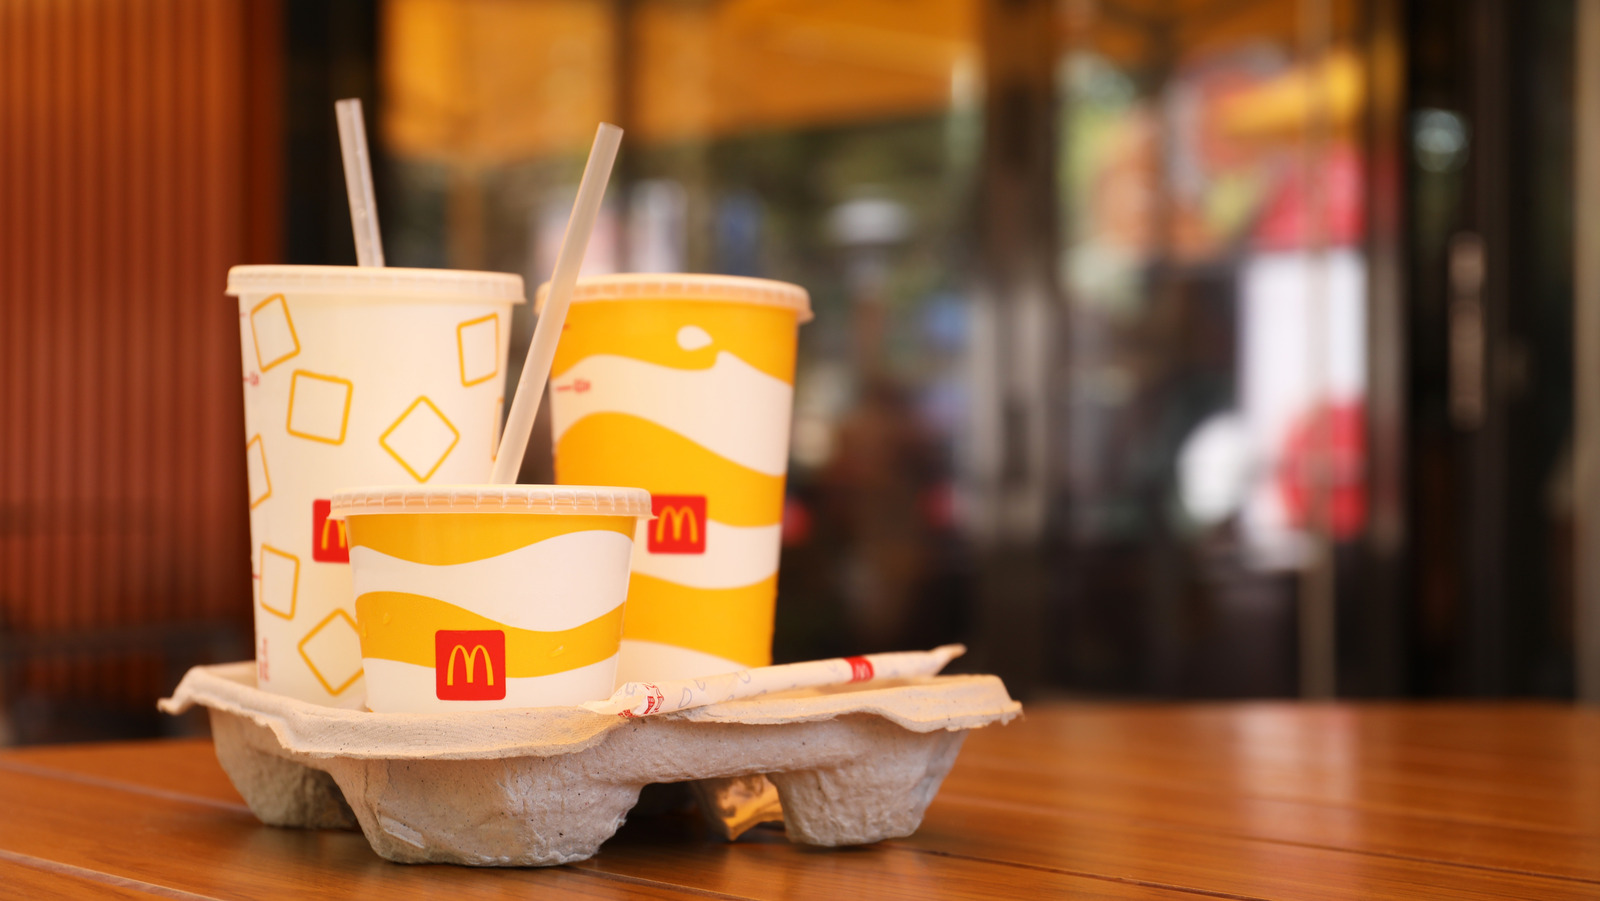 https://www.thedailymeal.com/img/gallery/your-mcdonalds-cup-lids-rectangular-buttons-actually-serve-a-purpose/l-intro-1701459164.jpg